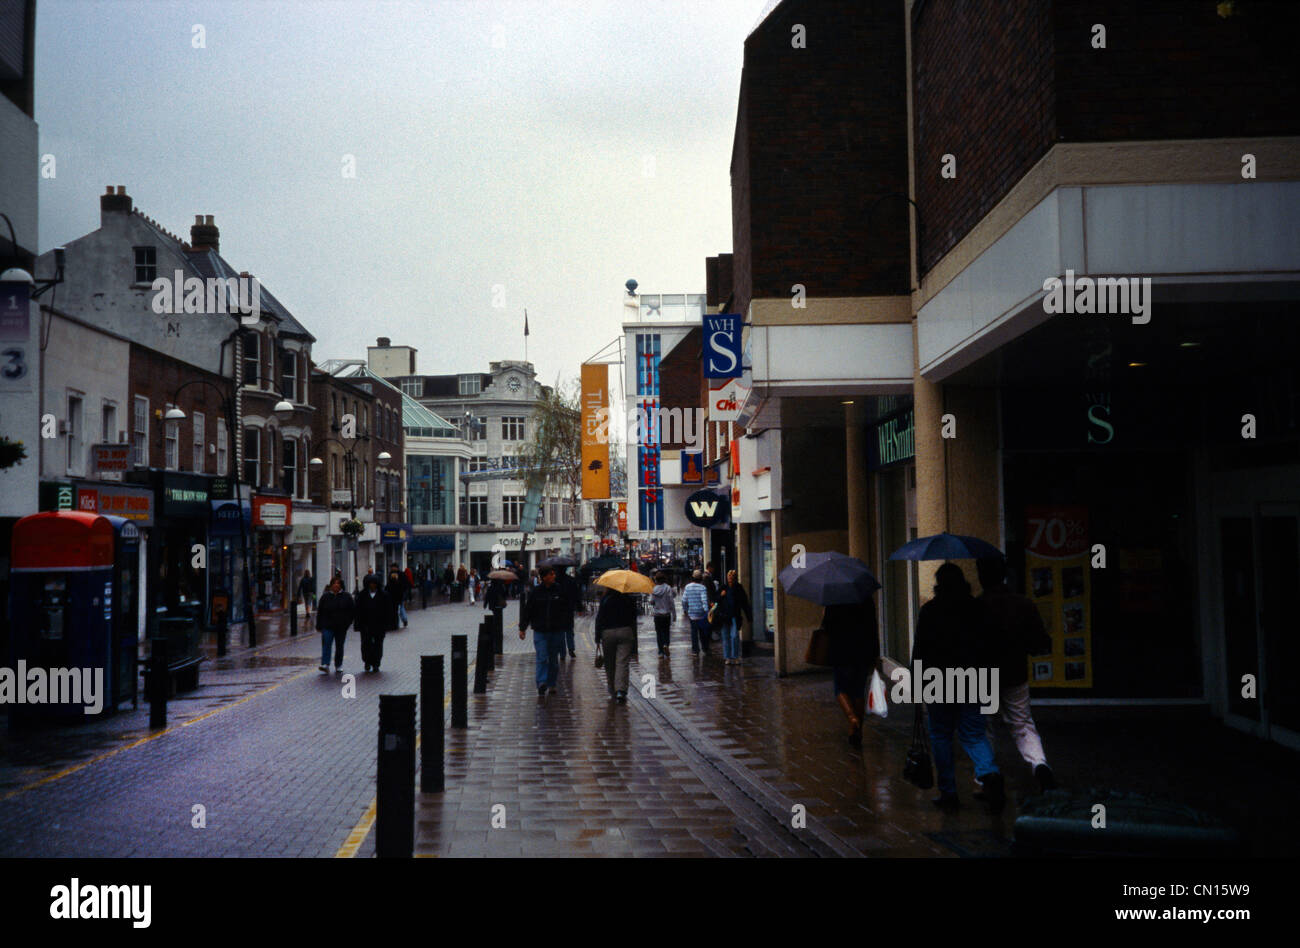 Surrey England Sutton High Street People Shopping In The Rain Stock Photo